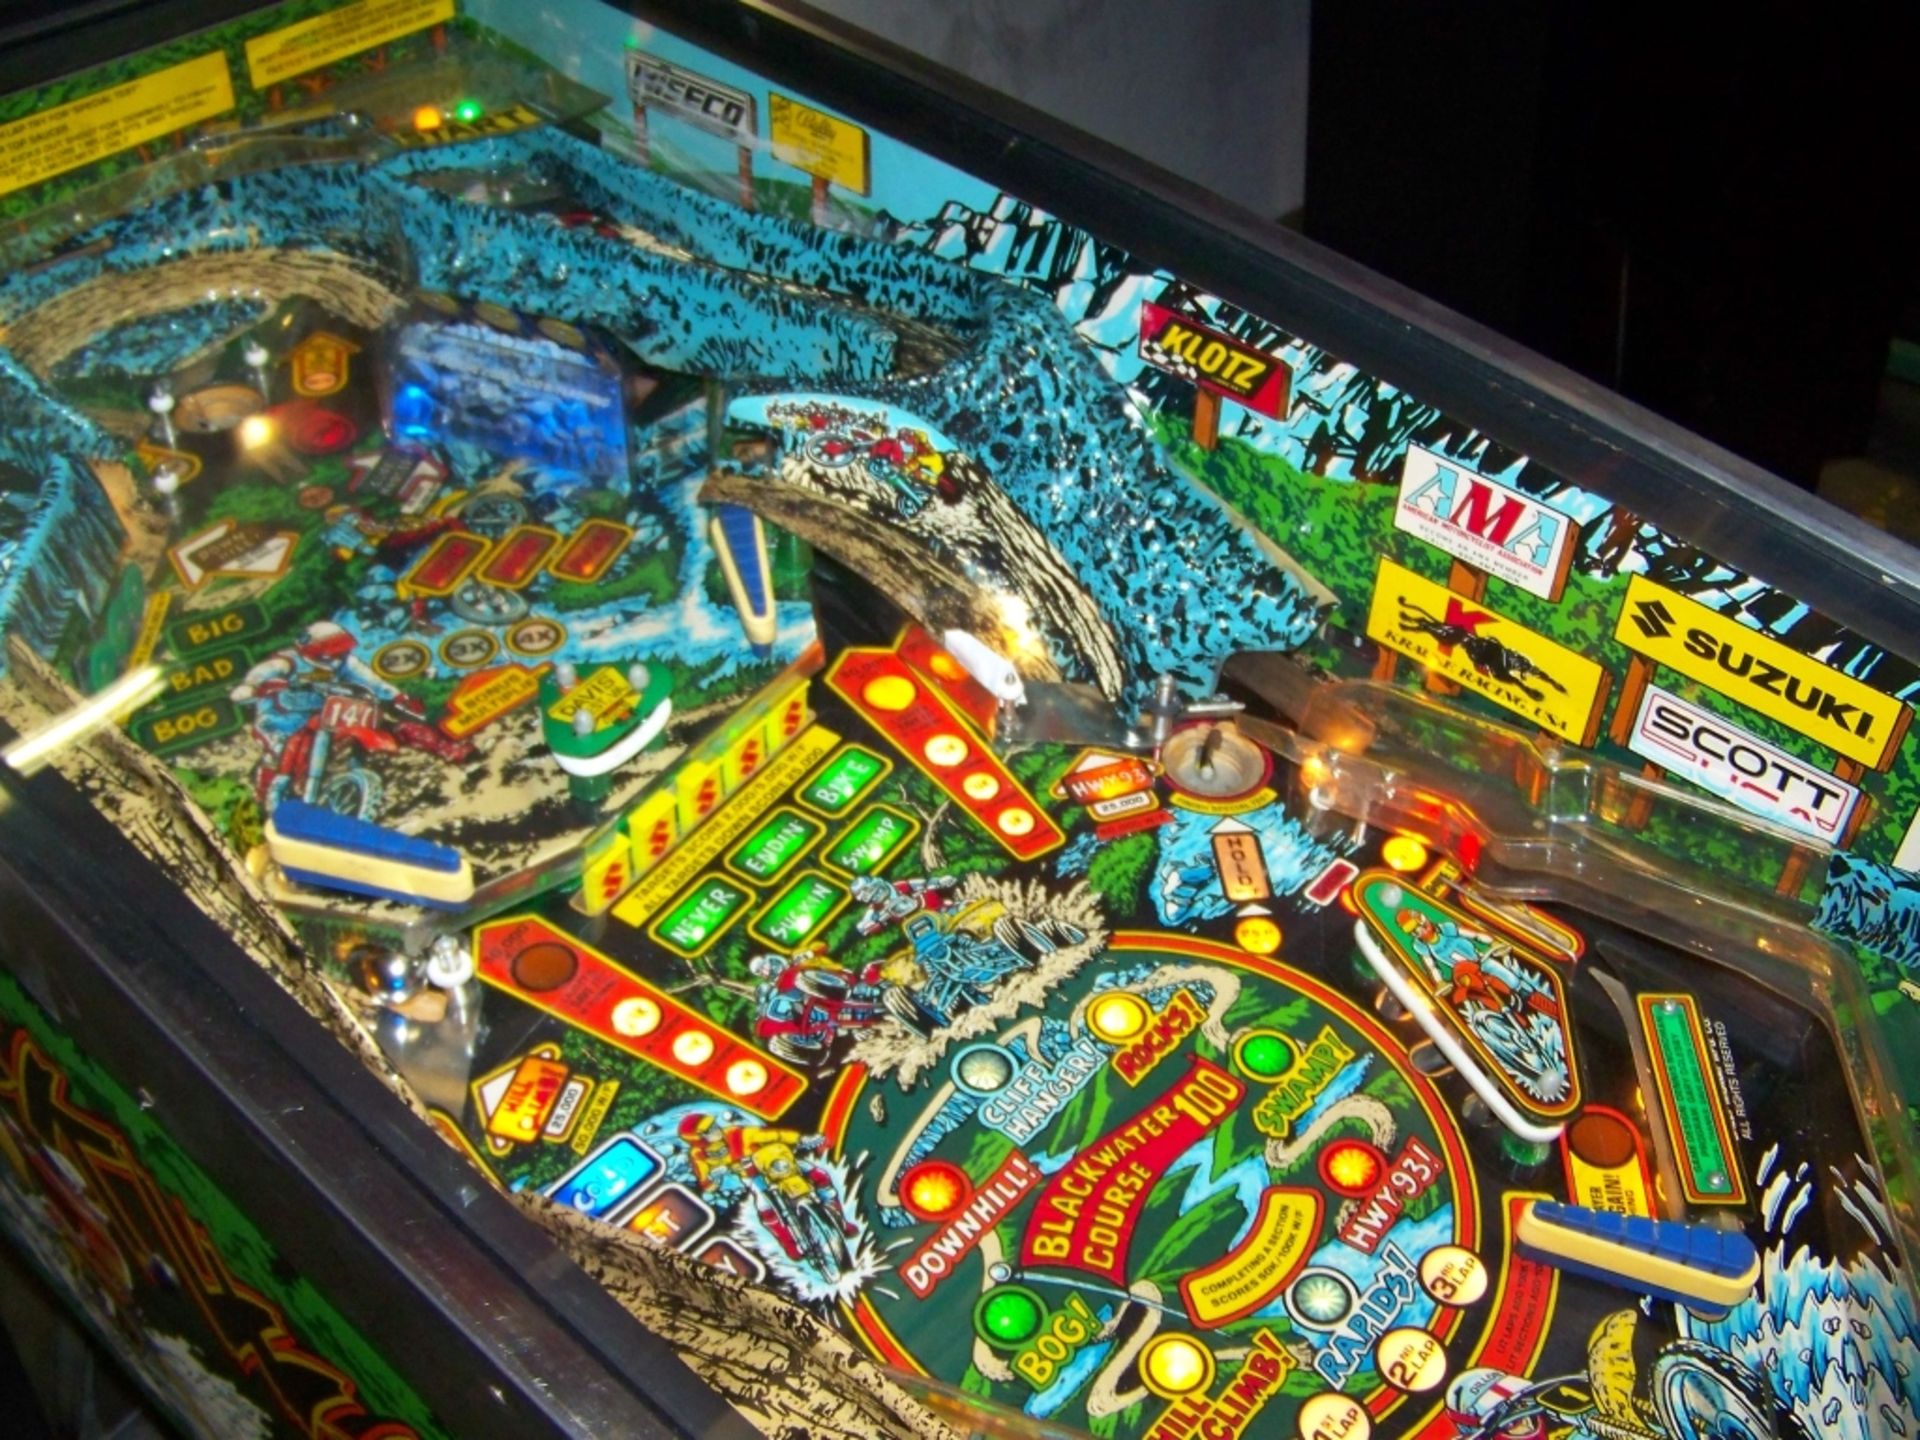 BLACKWATER 100 PINBALL MACHINE BALLY 1988 Item is in used condition. Evidence of wear and commercial - Image 9 of 10